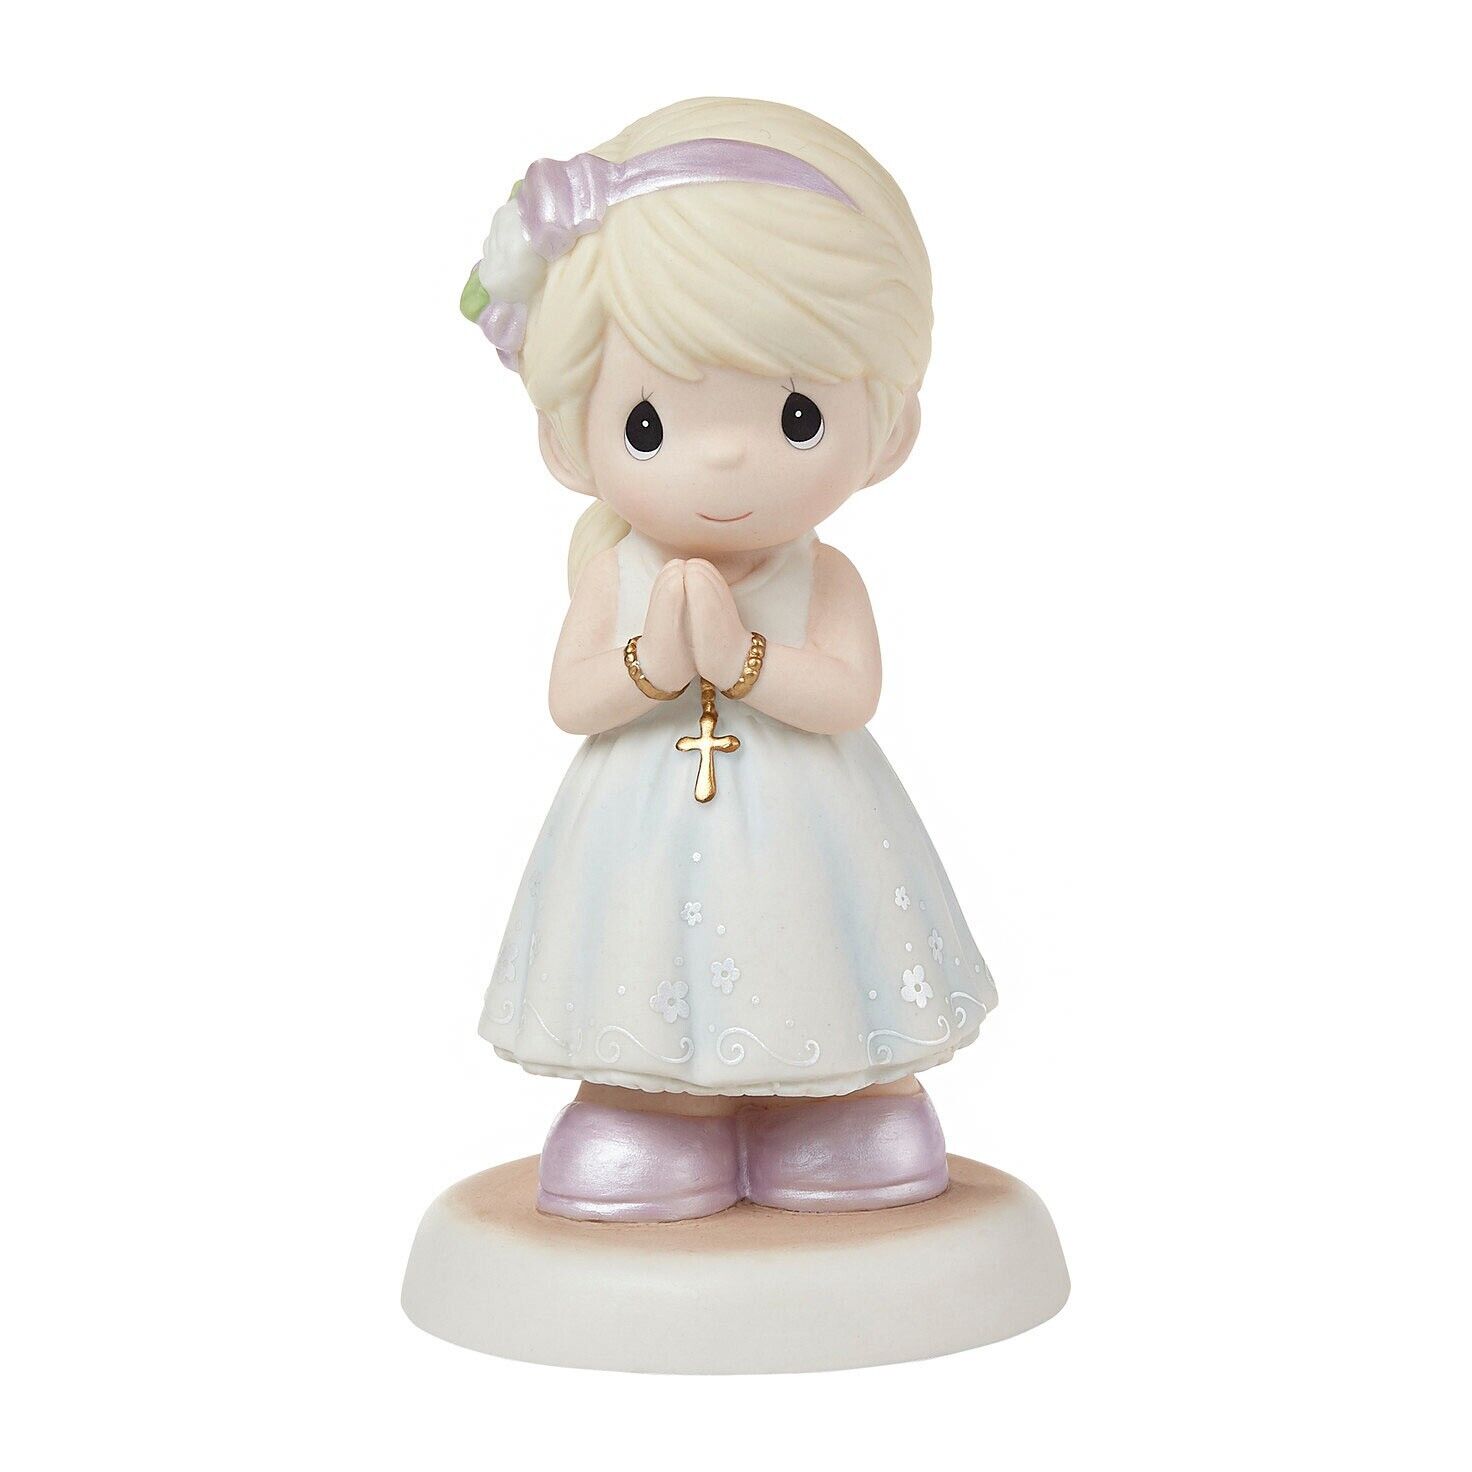 Precious Moments Figurine Blessings On Your 1st Communion Blonde Girl 222021